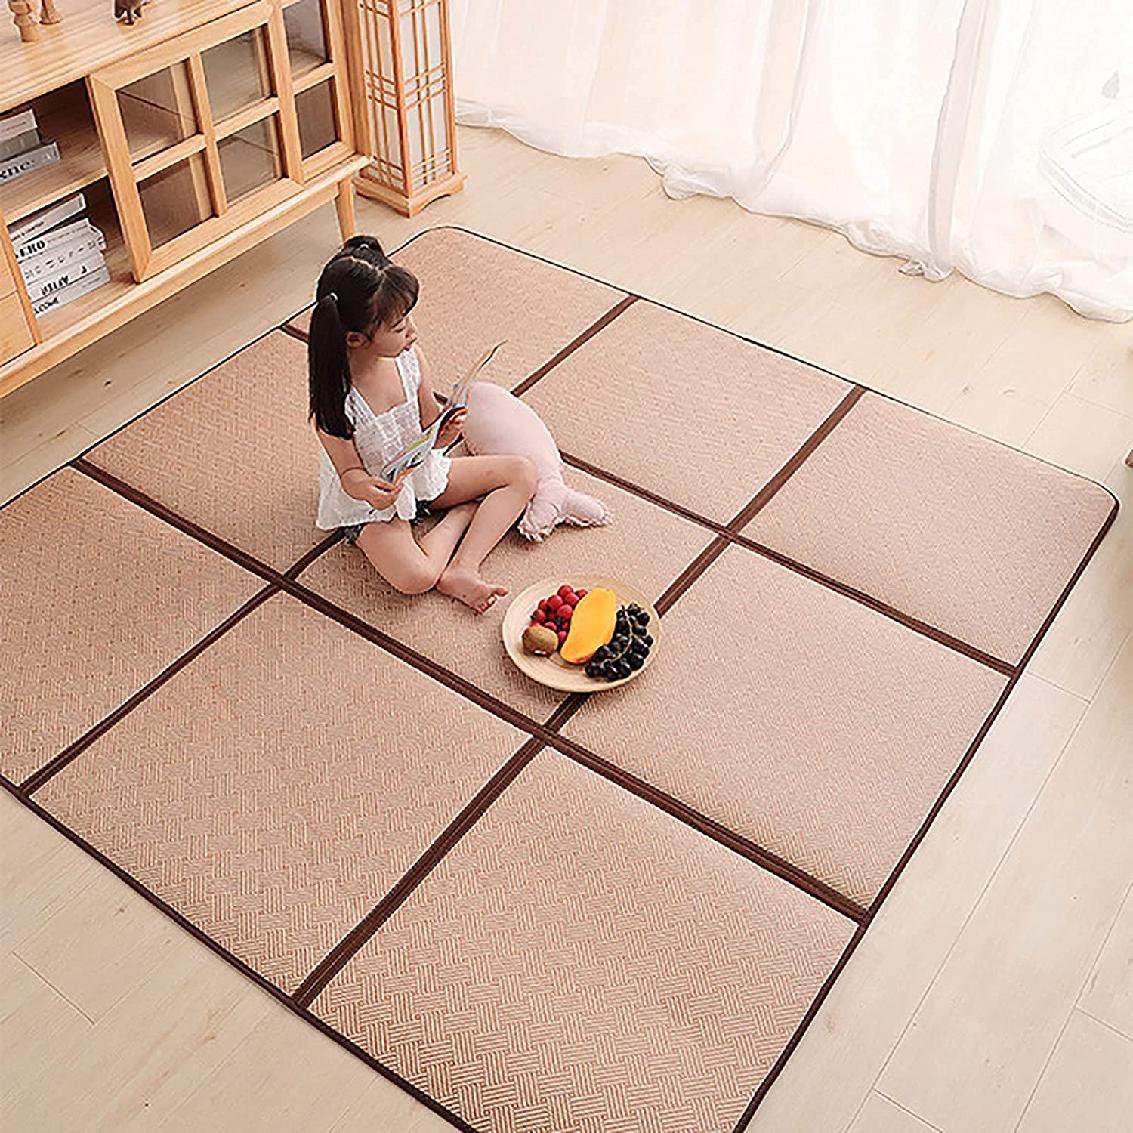 micykuxu Square Chair Mat with Straight Cut Edge for Firm Surfaces